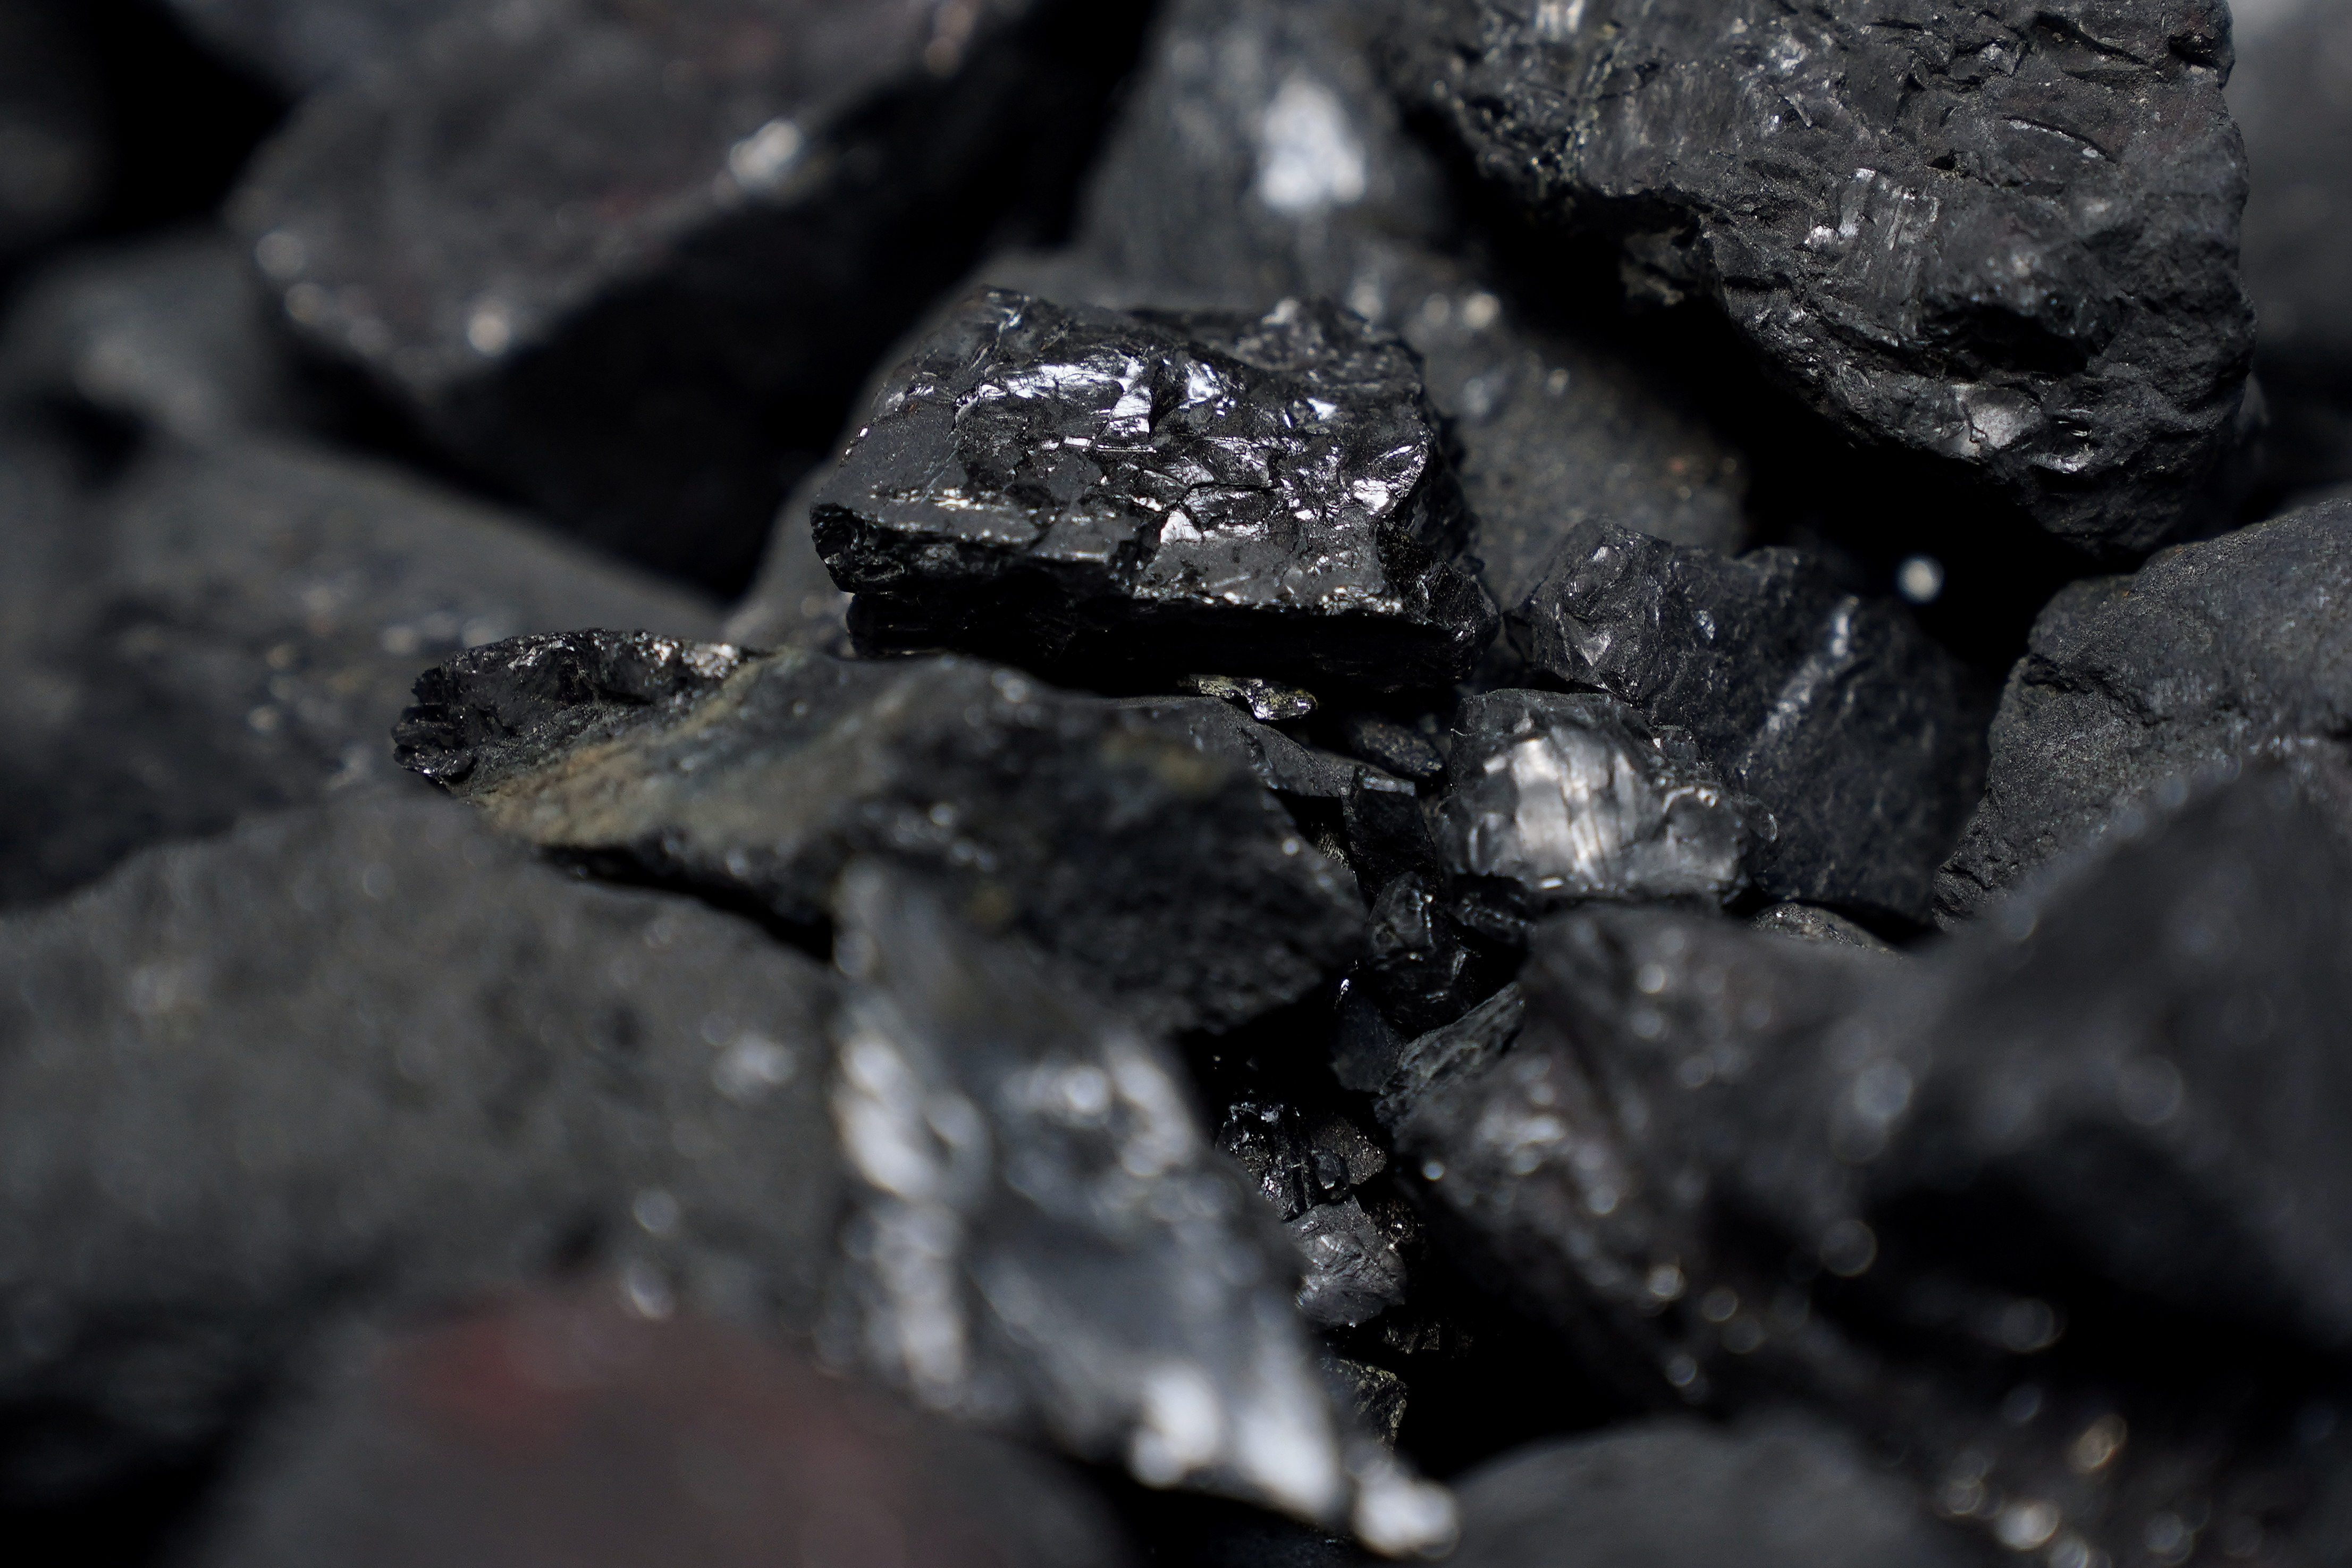 Coal is pictured in a container in New York City